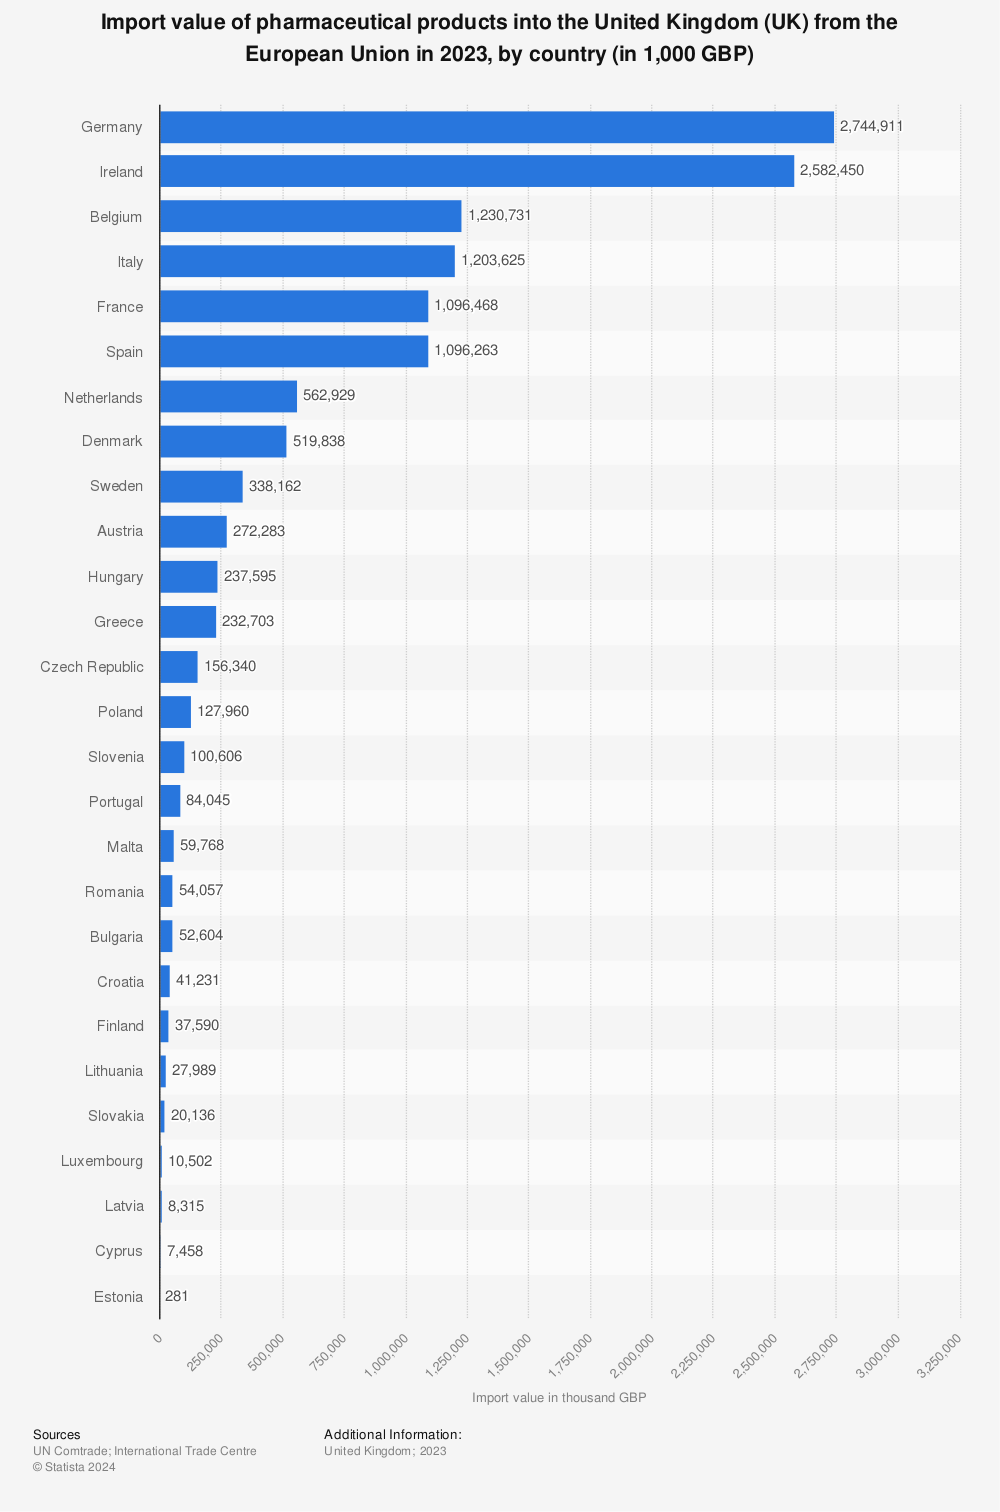 Statistic: Import value of pharmaceutical products into the United Kingdom (UK) from the European Union in 2022, by country (in 1,000 GBP) | Statista